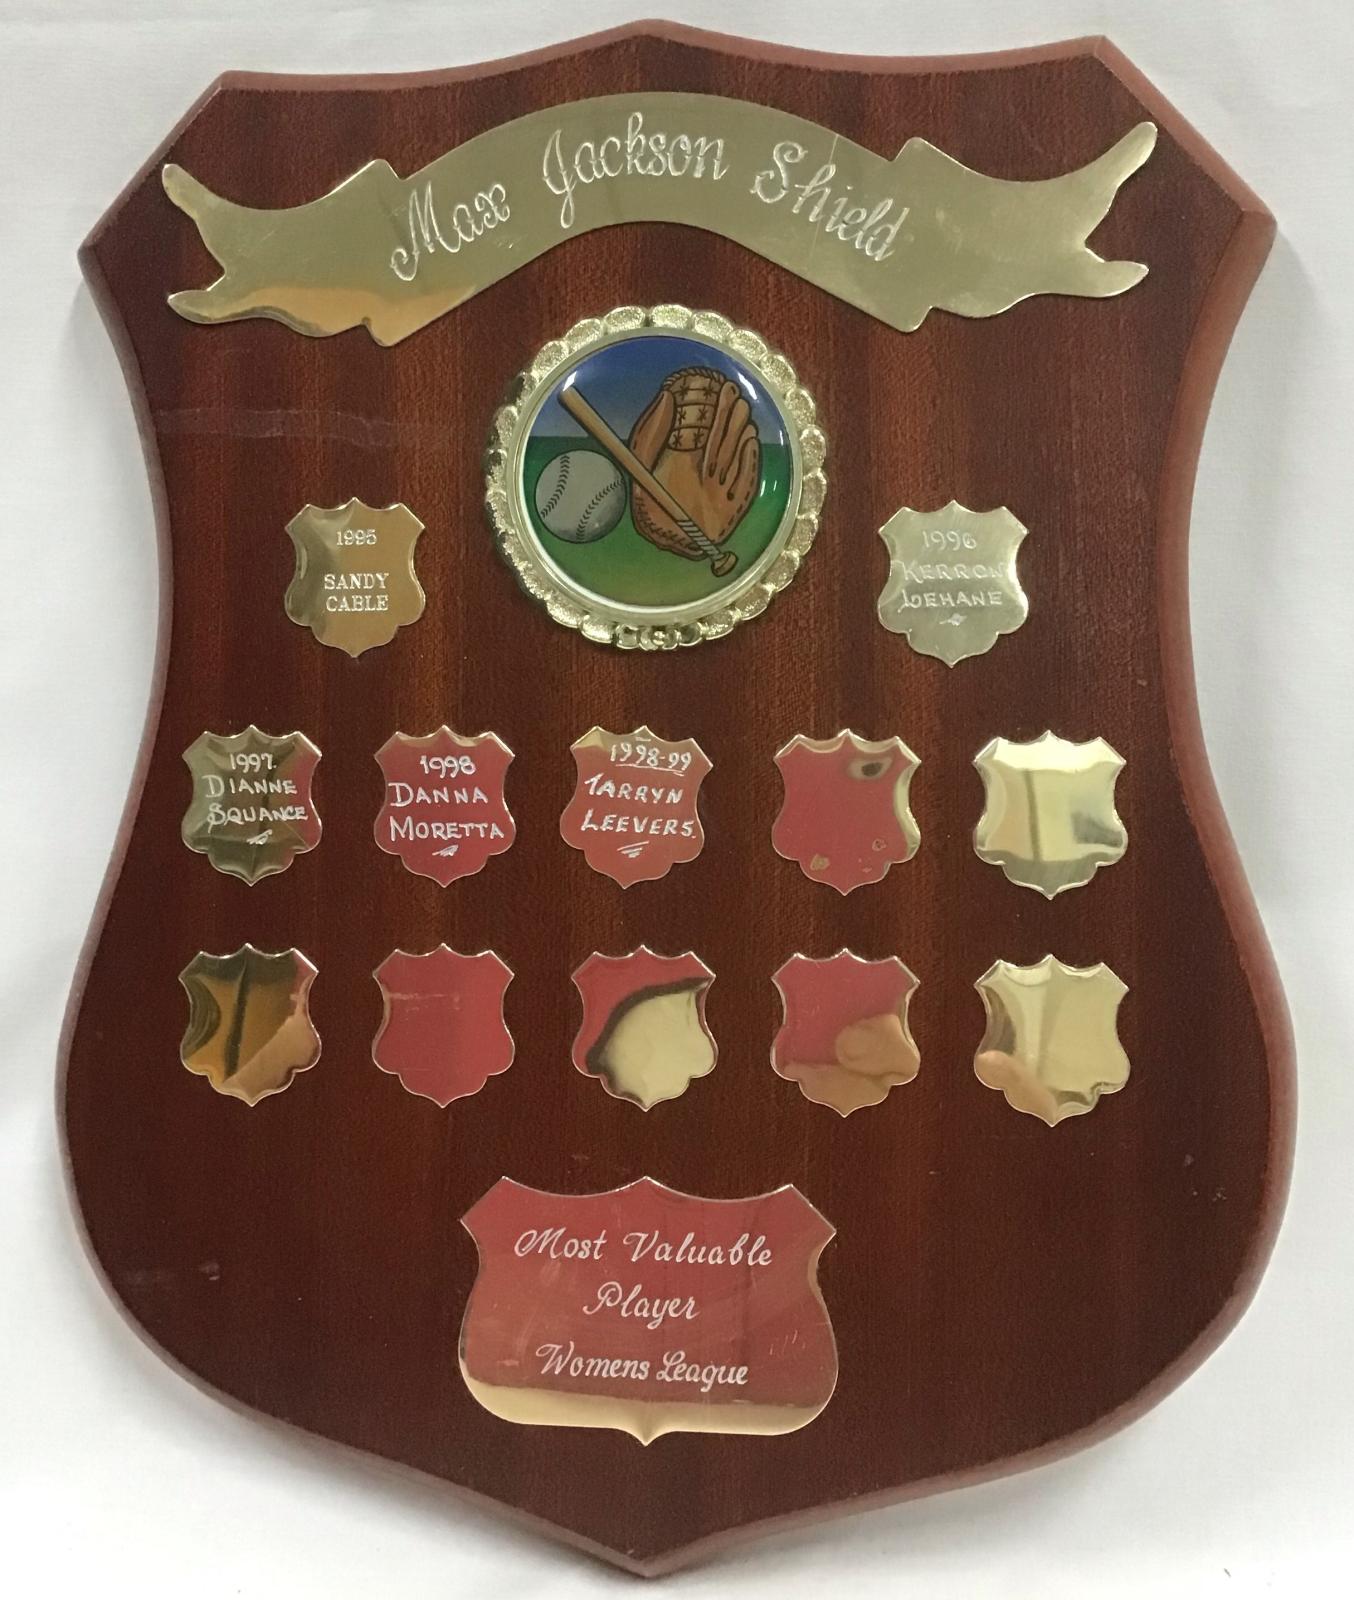 Max Jackson Shield awarded to Women's League baseball Most Valuable Player (front)